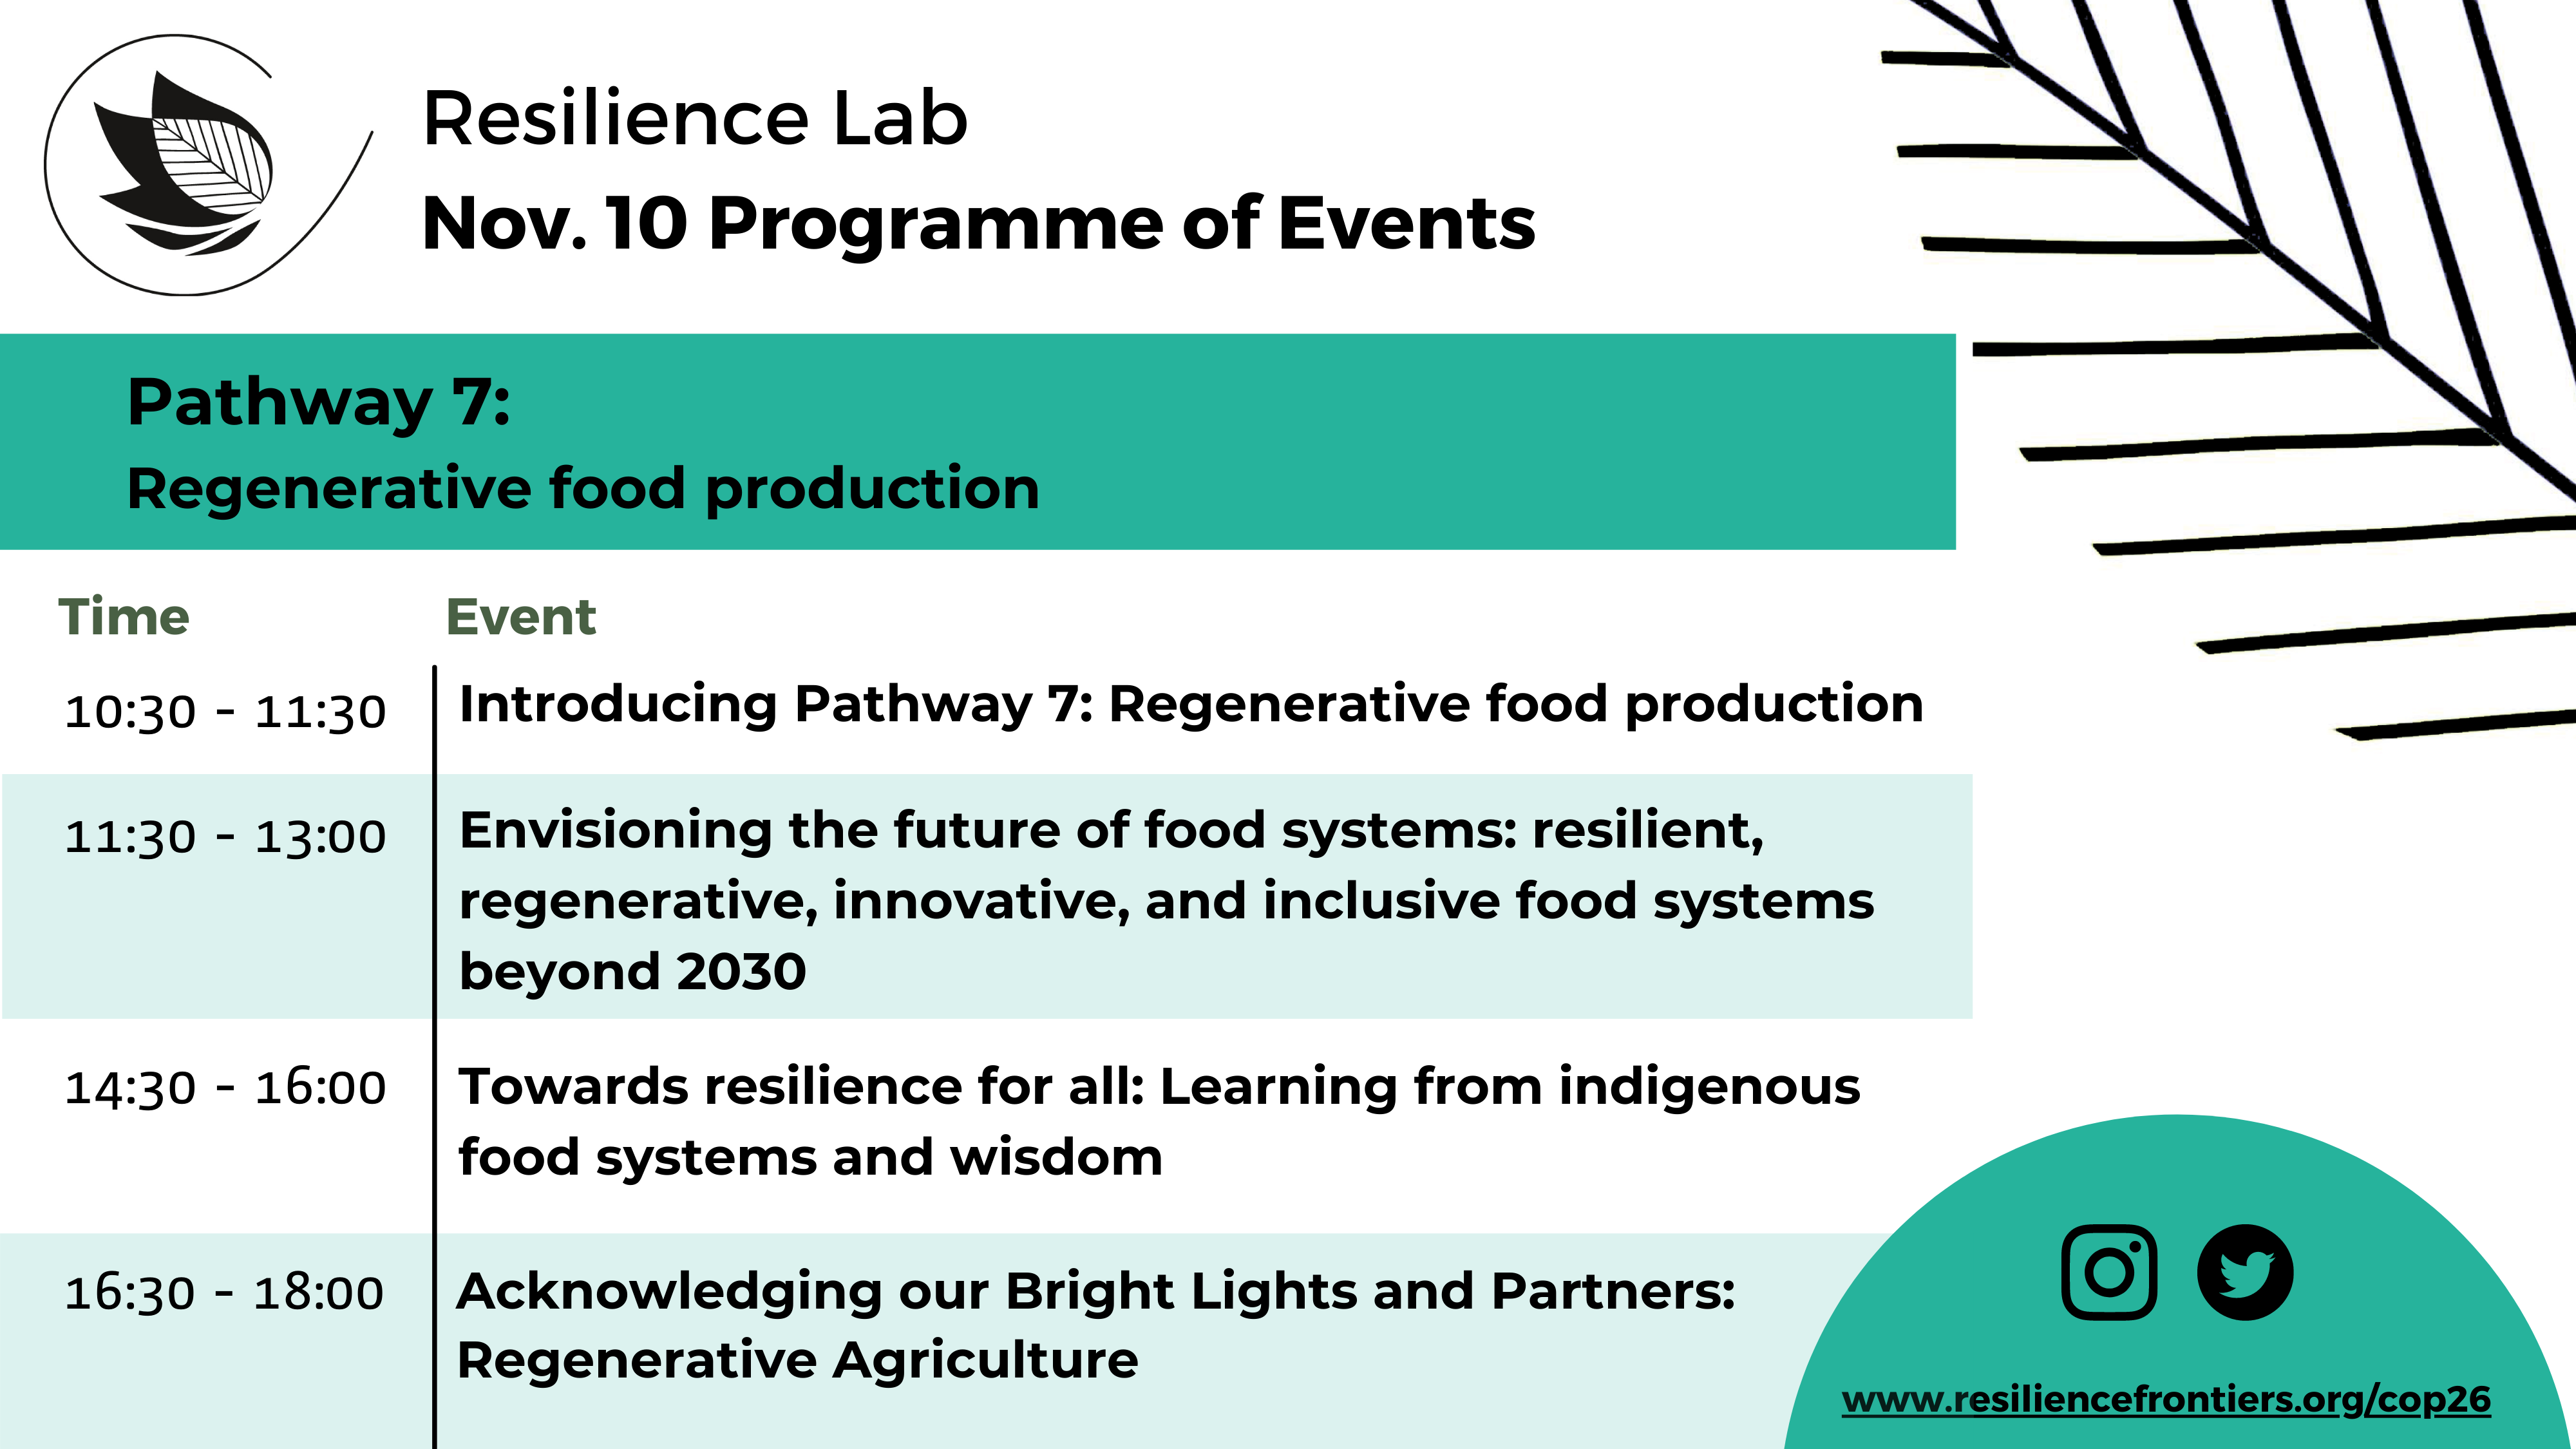 Resilience Lab Day 8 Programme of Events